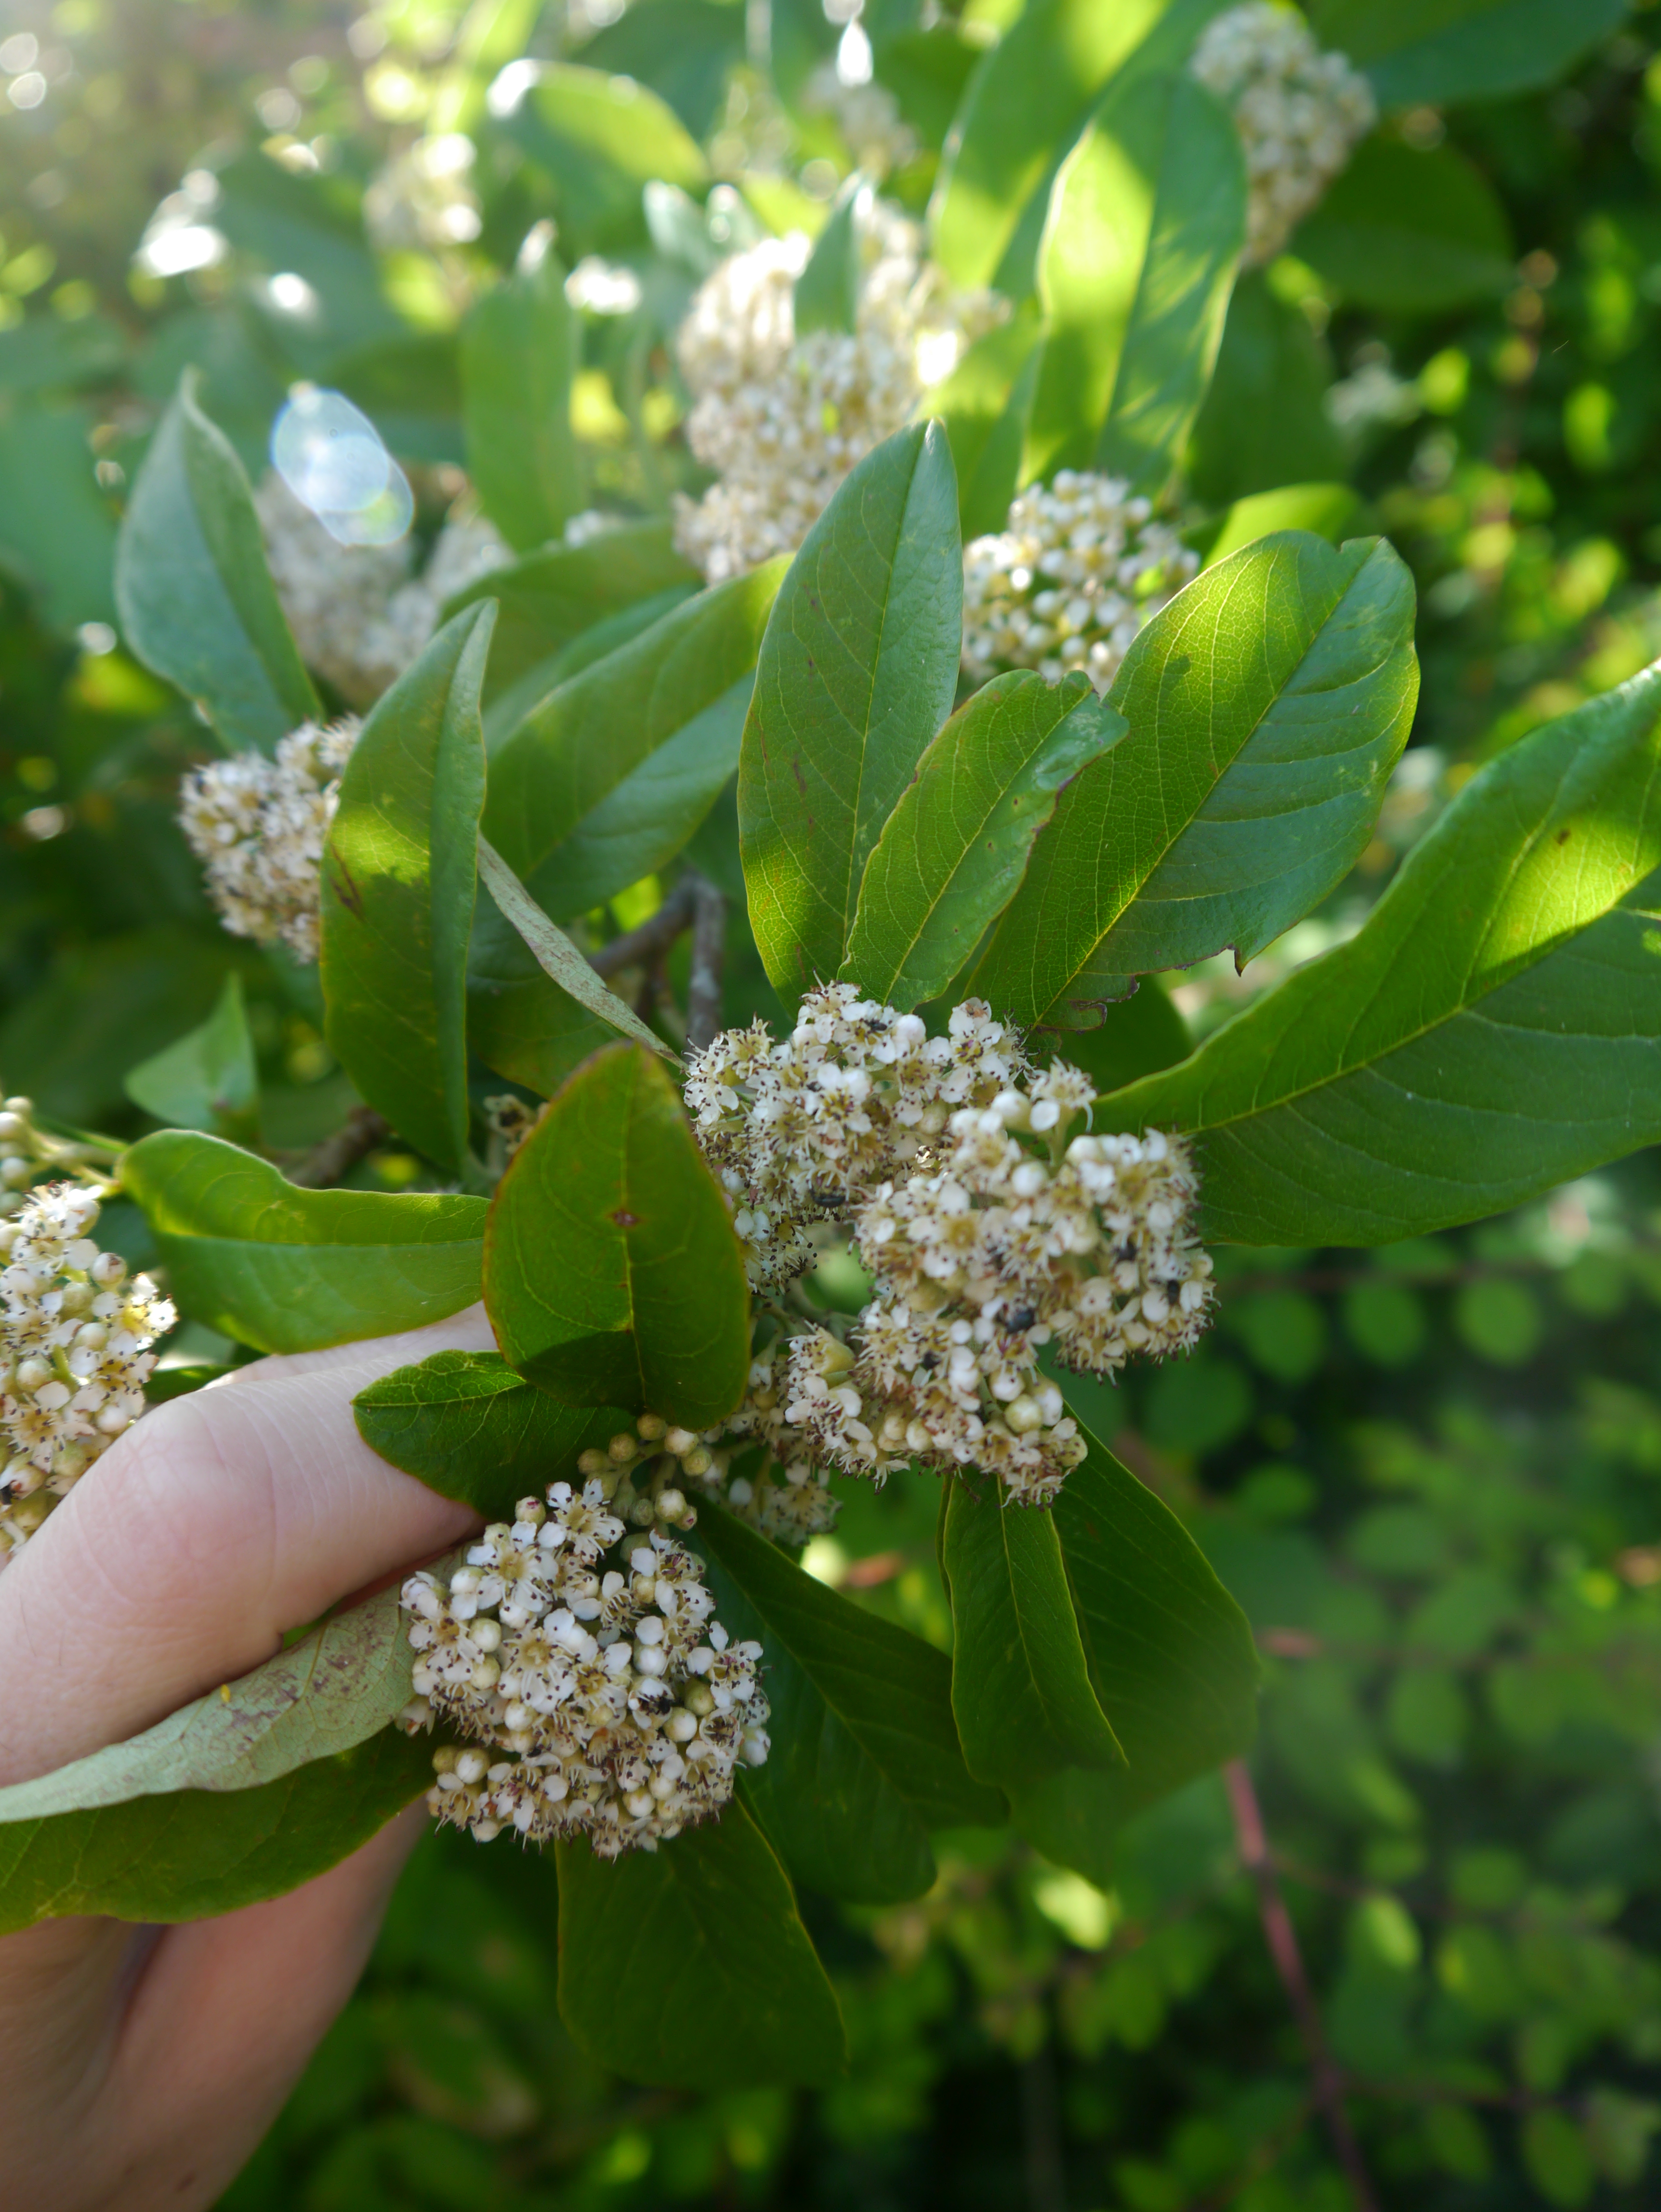 NaturePlus: Deciduous red berries, small white flowers - ID please